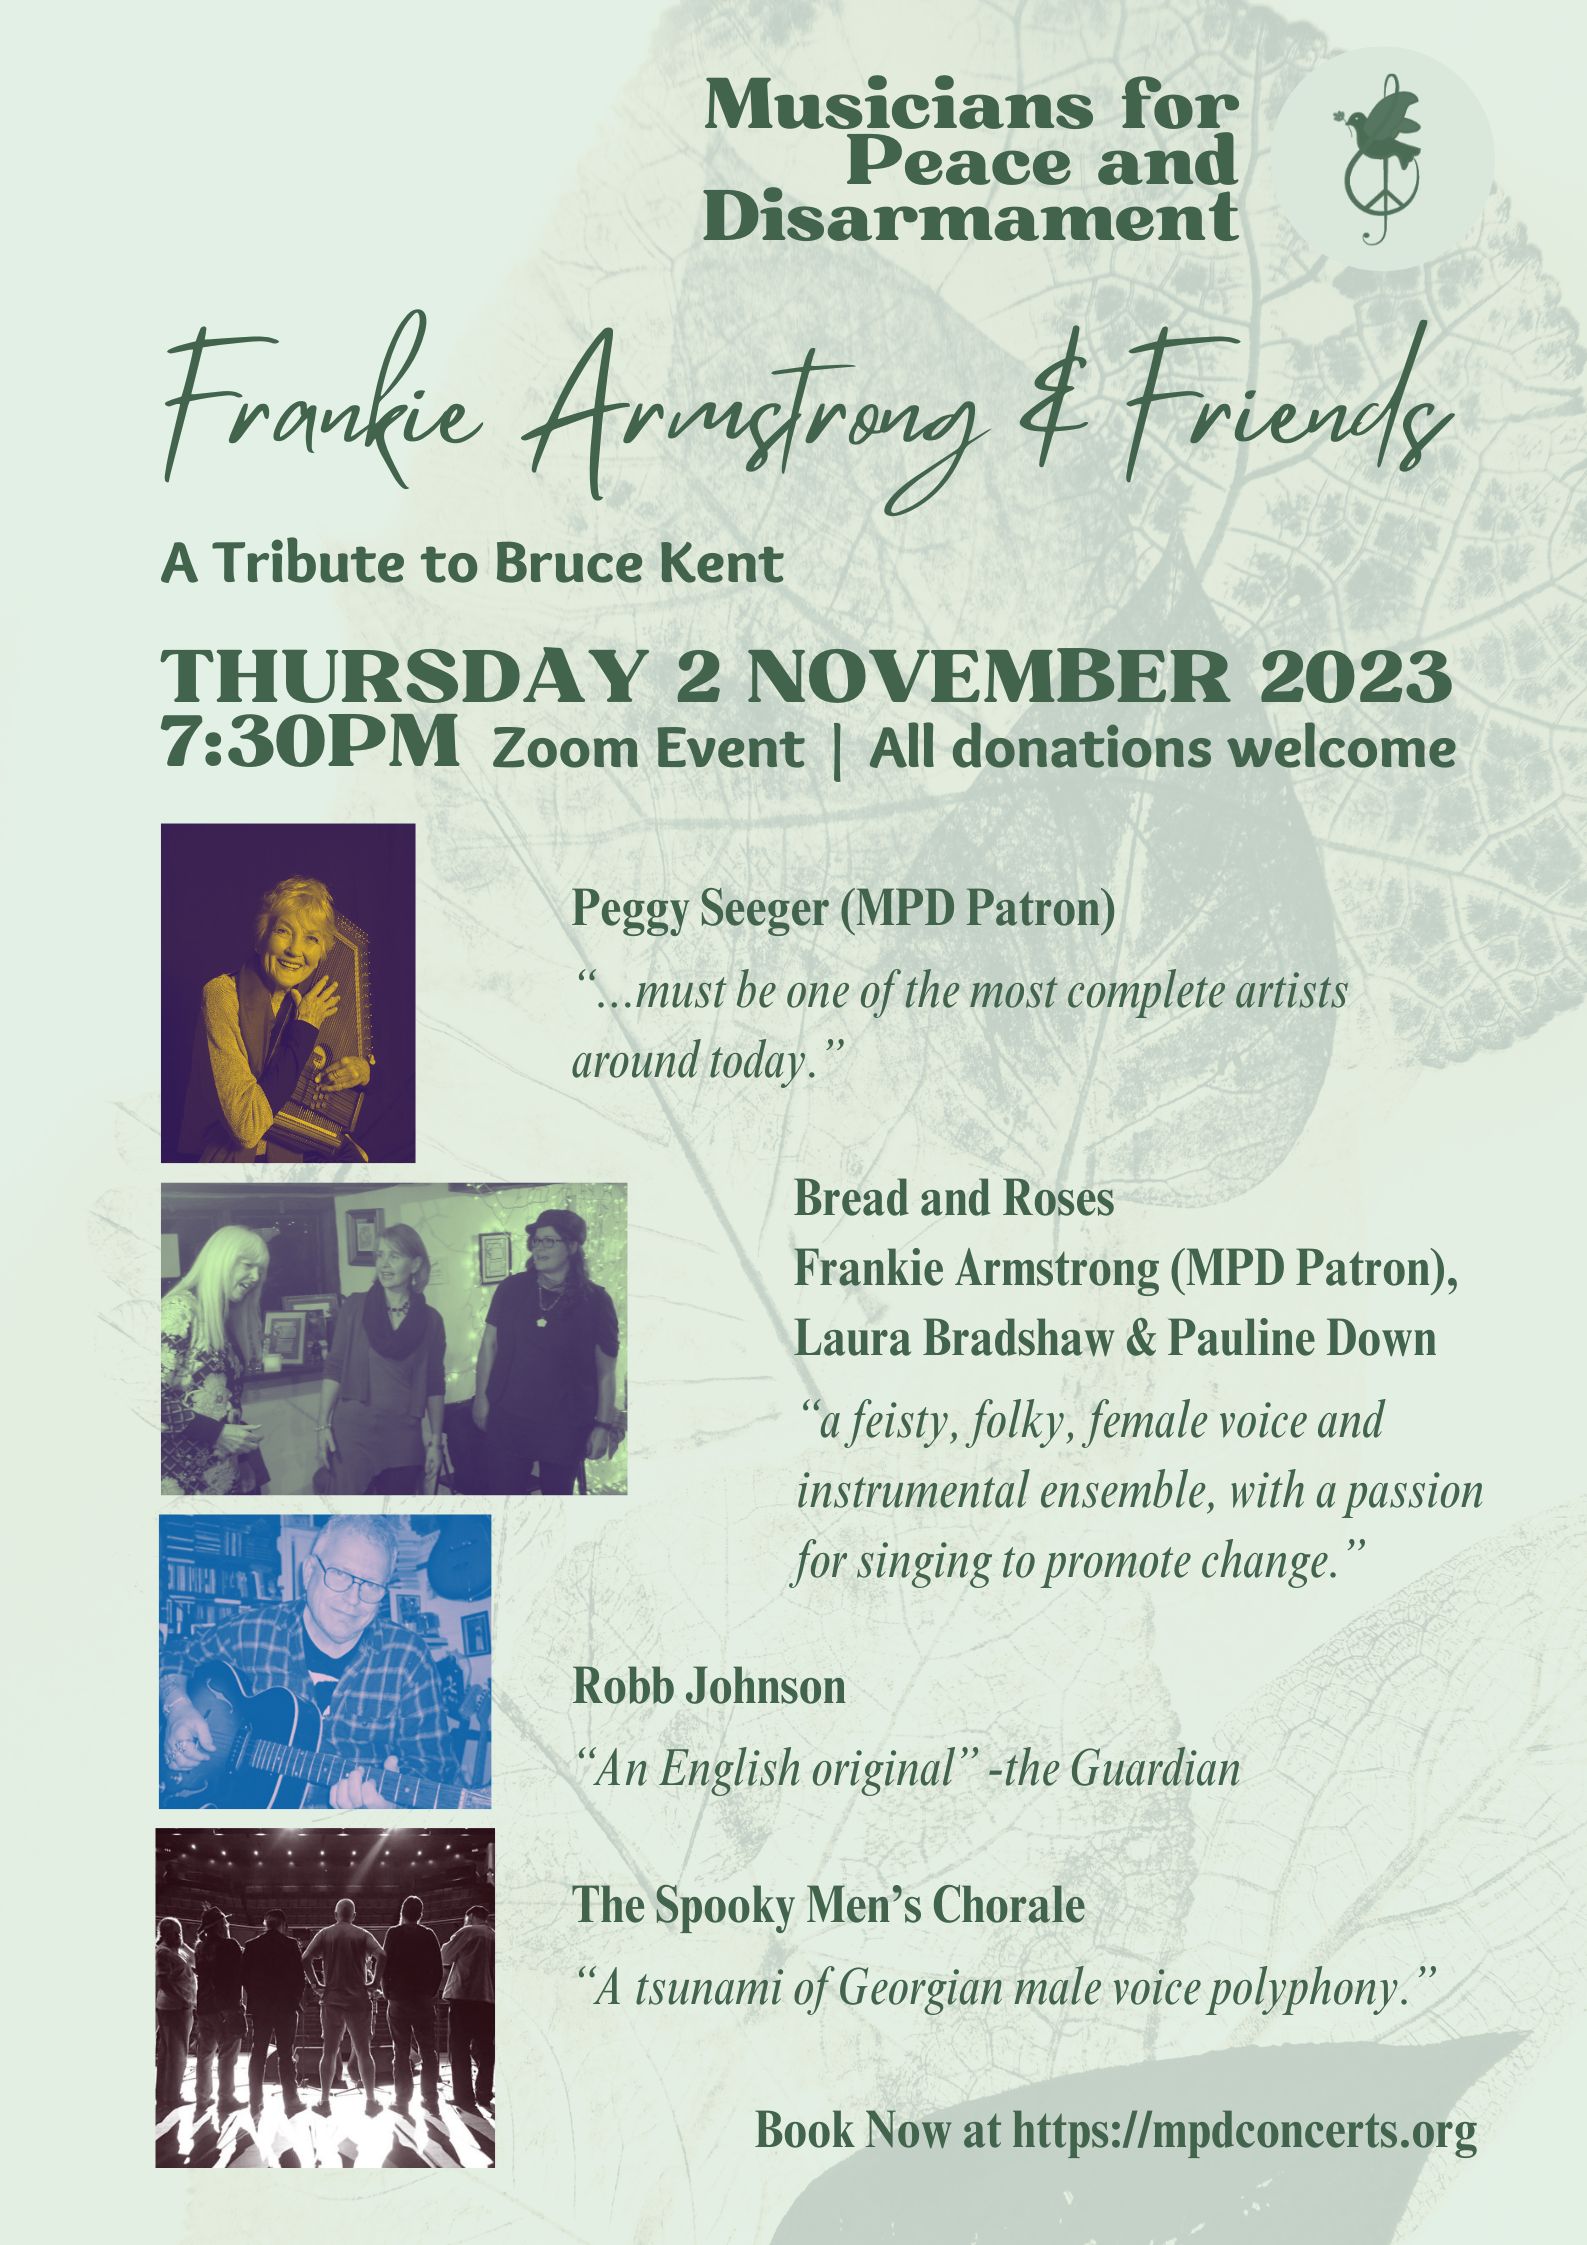 Songs to Stir Action for Peace: Frankie Armstrong and Friends